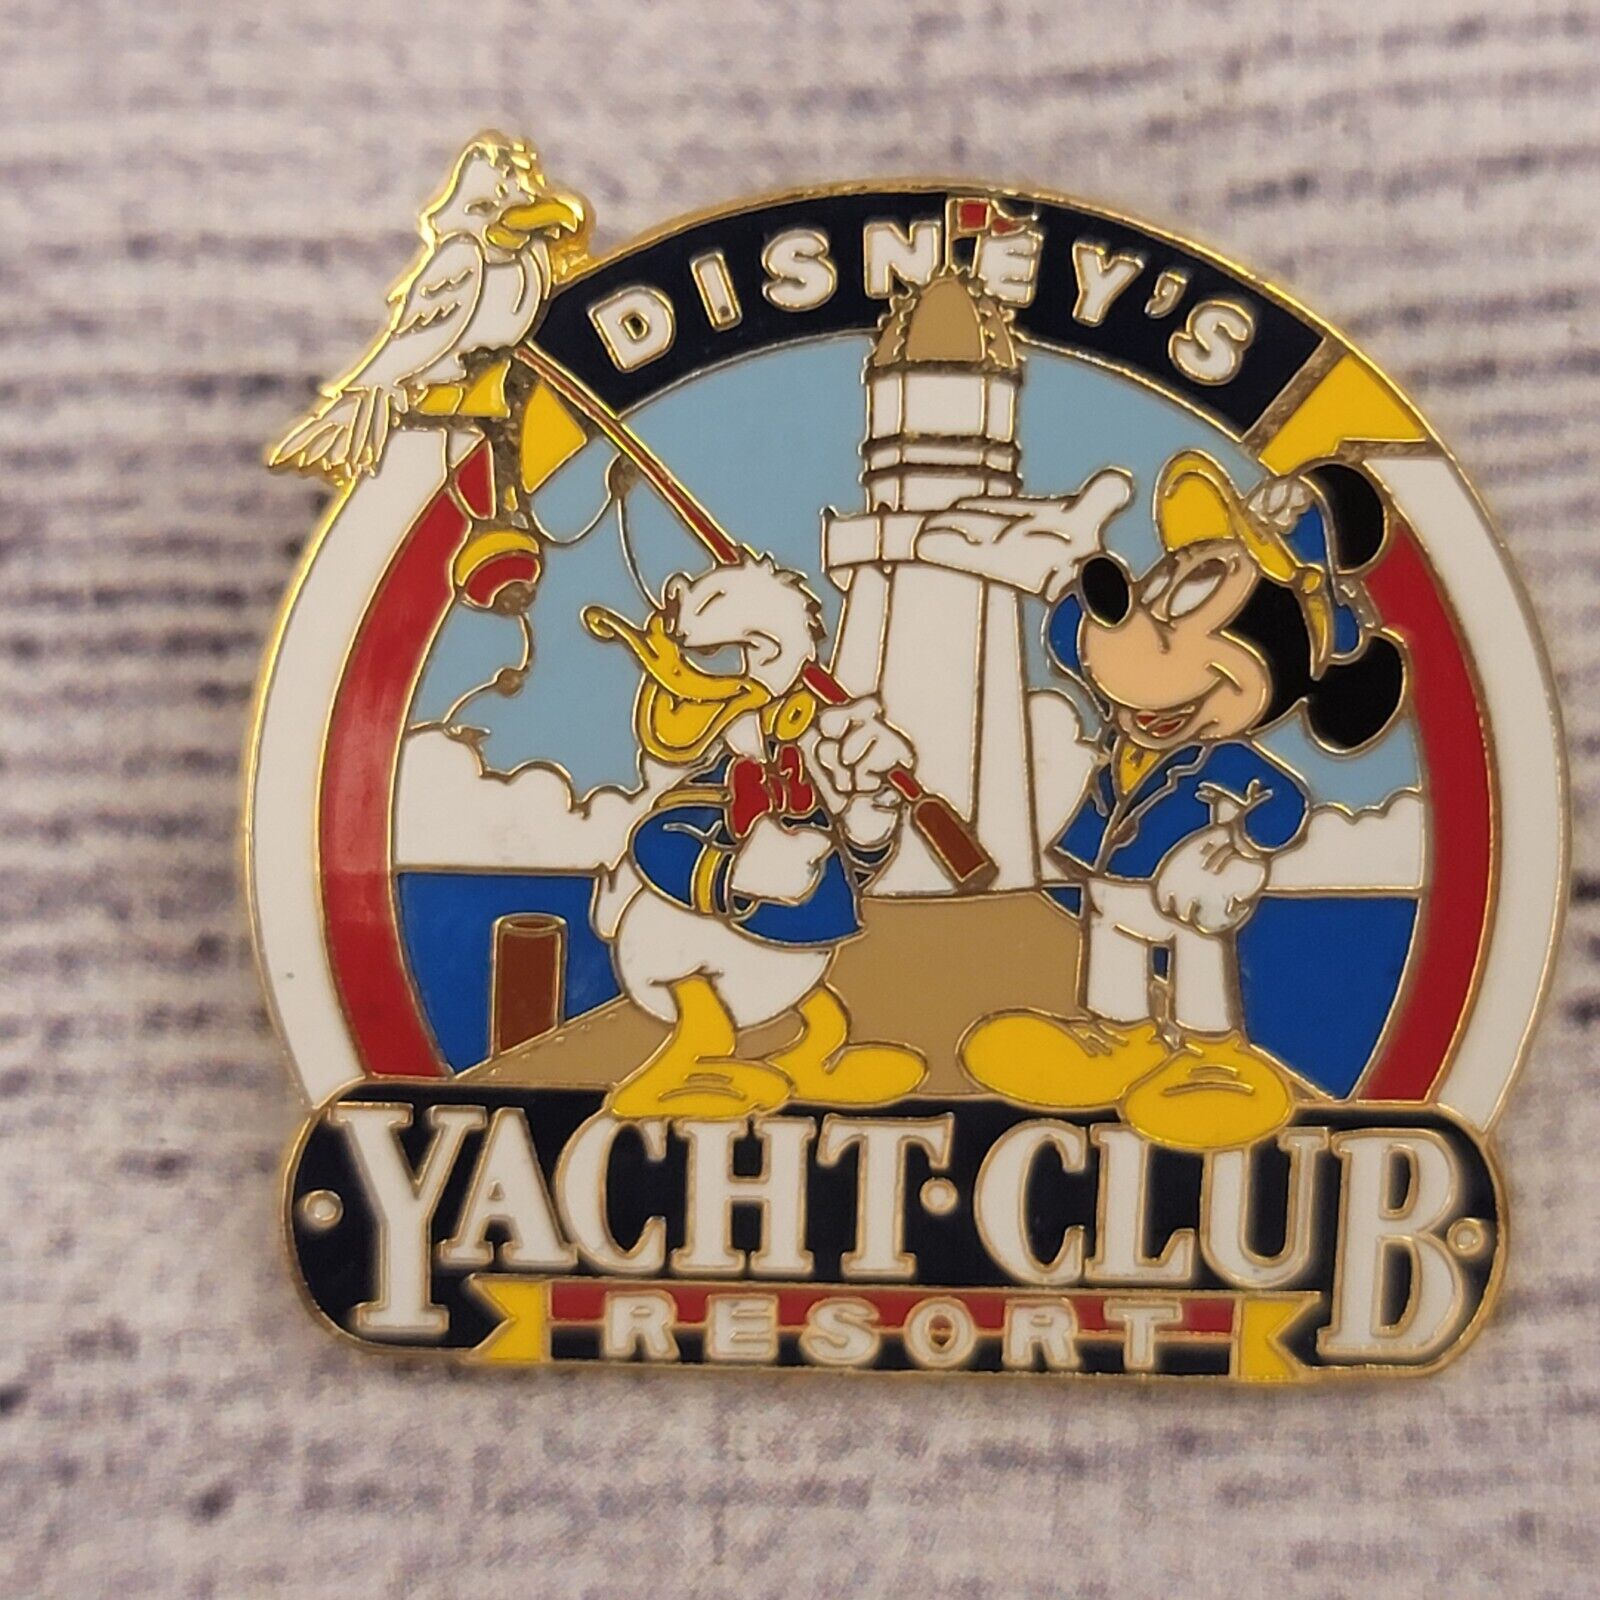 Disney Donald & Mickey Standing On The Pier At The Yacht Club Resort Pin#3855